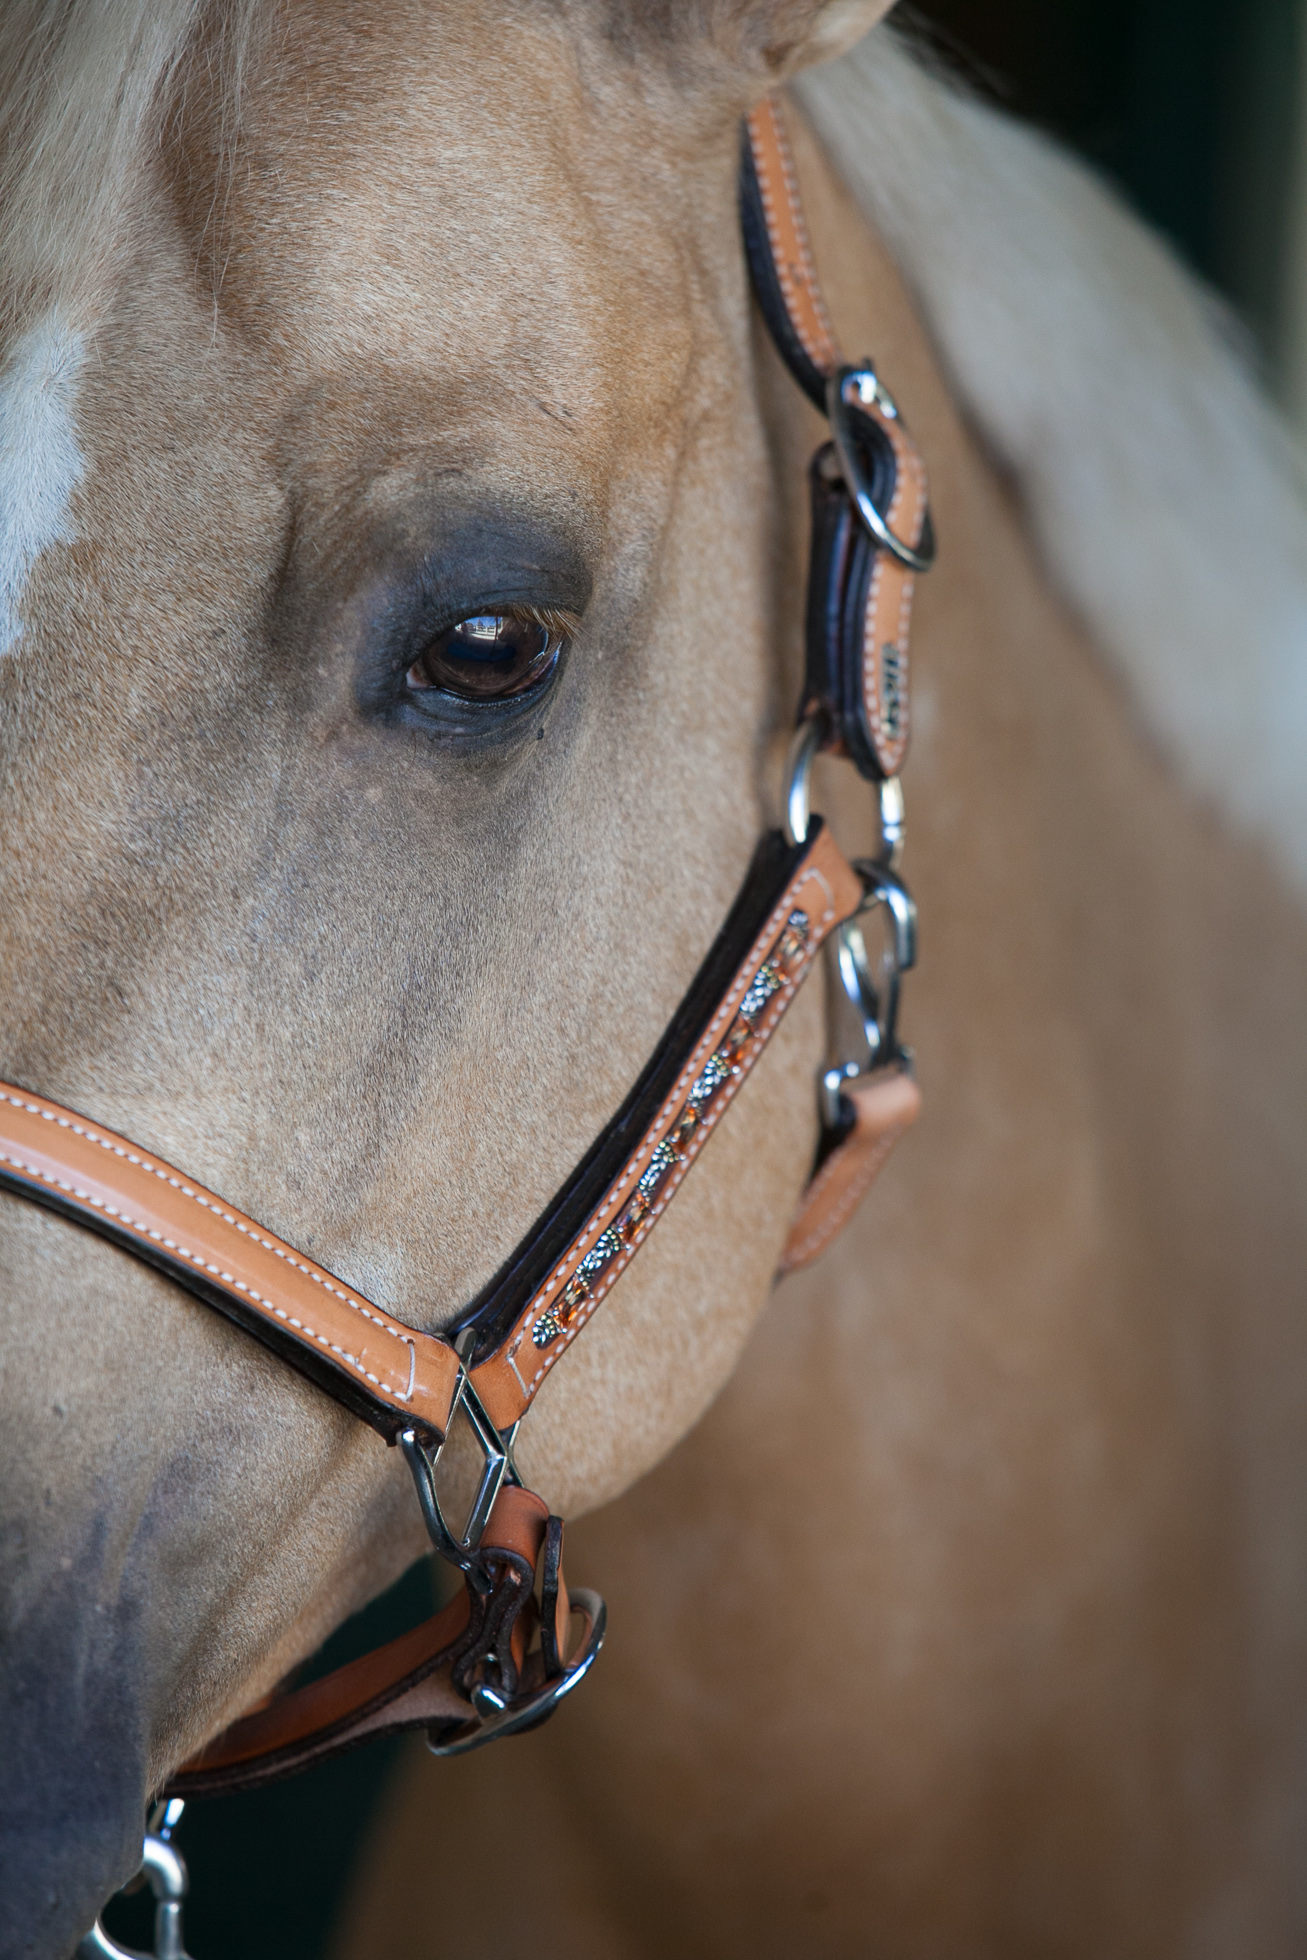 Shop Western Dressage Halters – People On Horses – Ride With Expression!